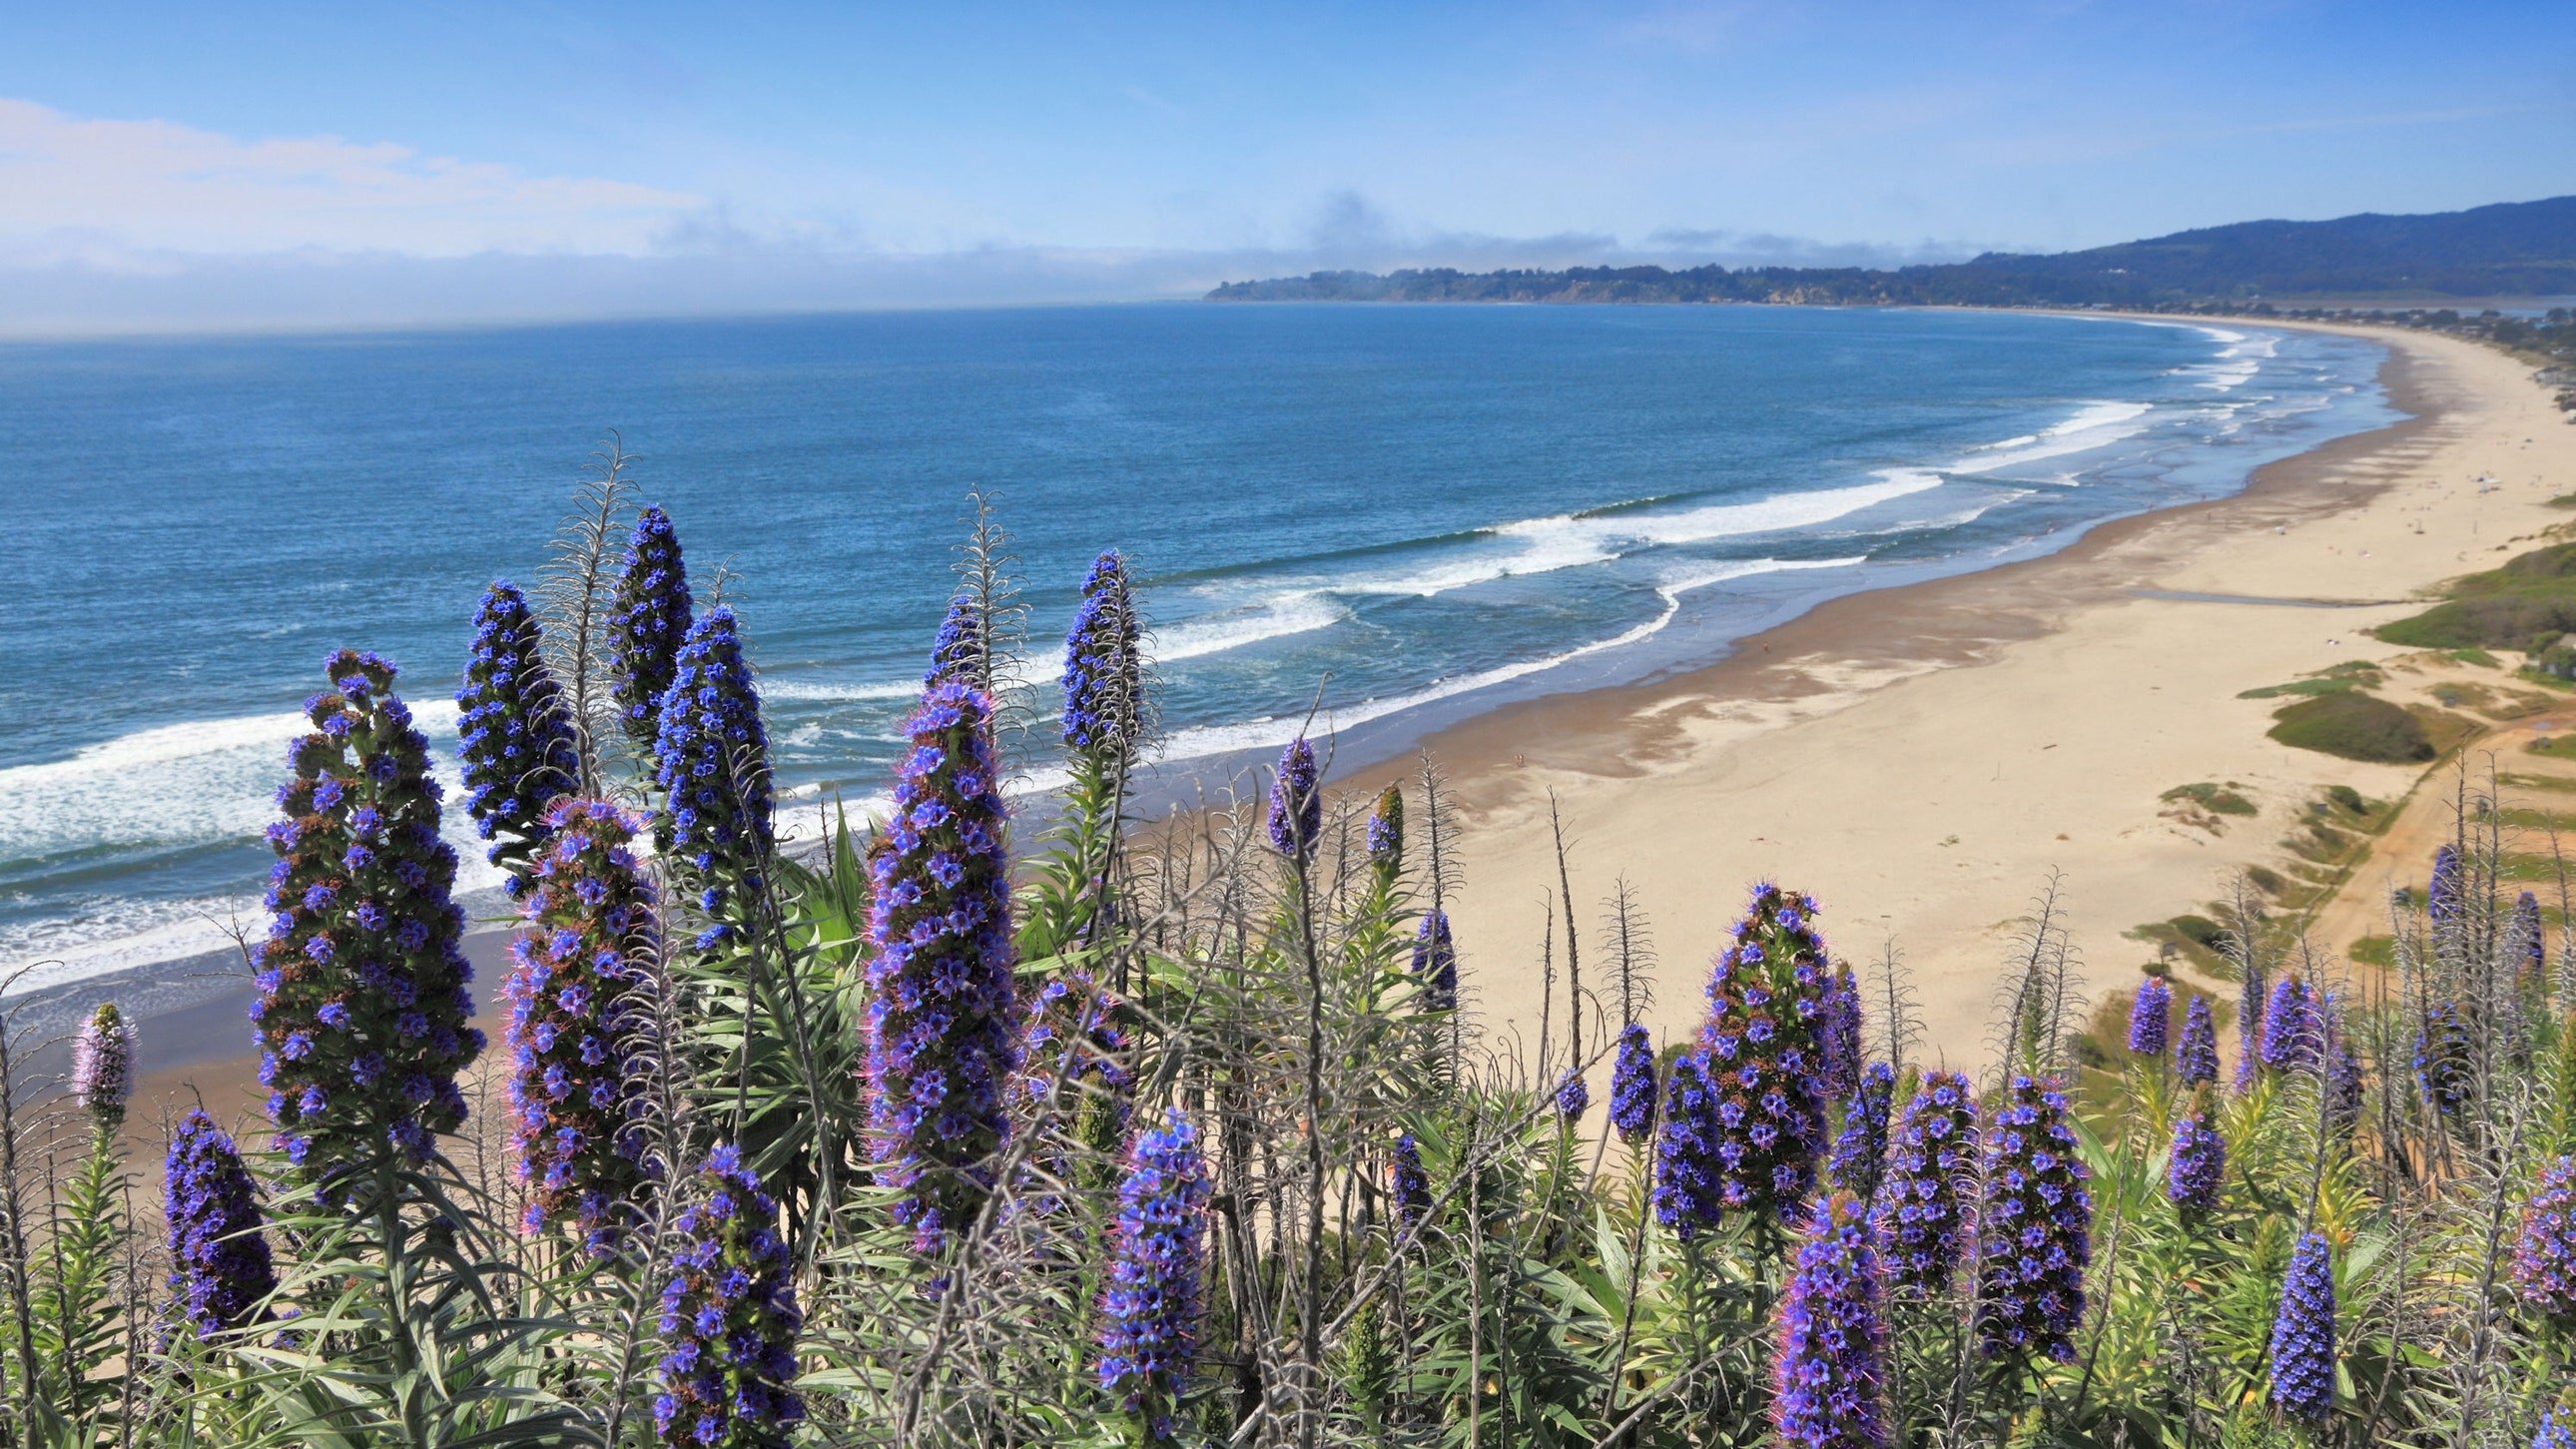 Best Beaches In California, From Surfer Friendly To Cliffside Views. Condé Nast Traveler